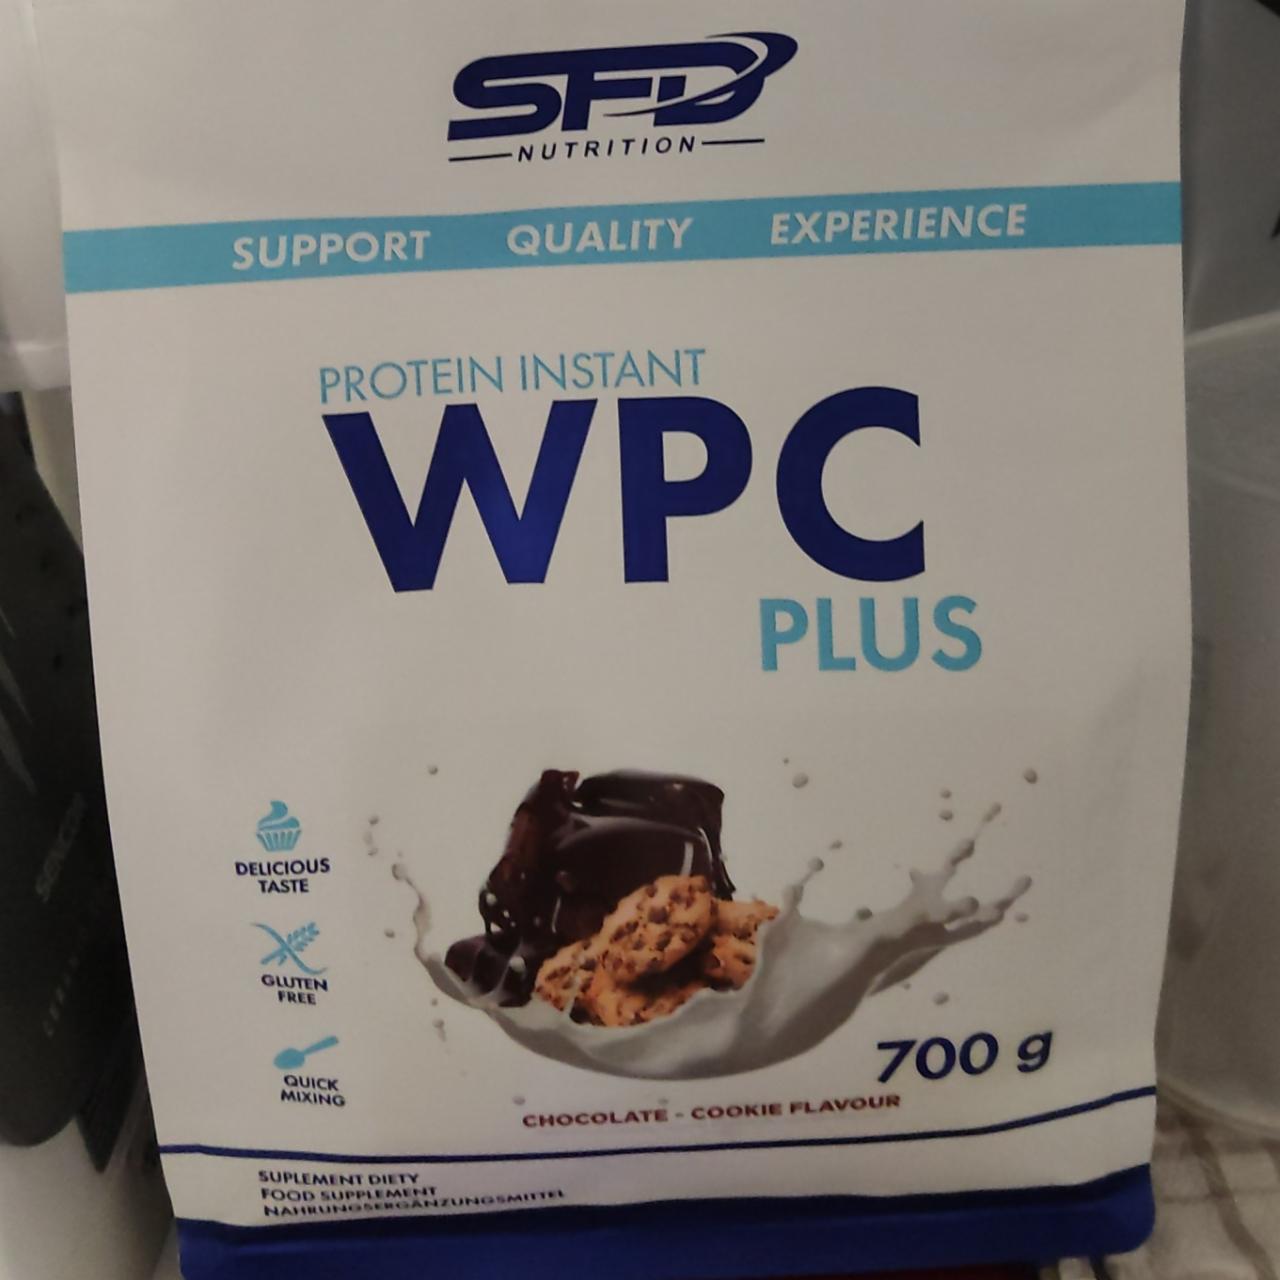 Fotografie - WPC Plus Protein Instant Chocolate-Cookie SFD Nutrition